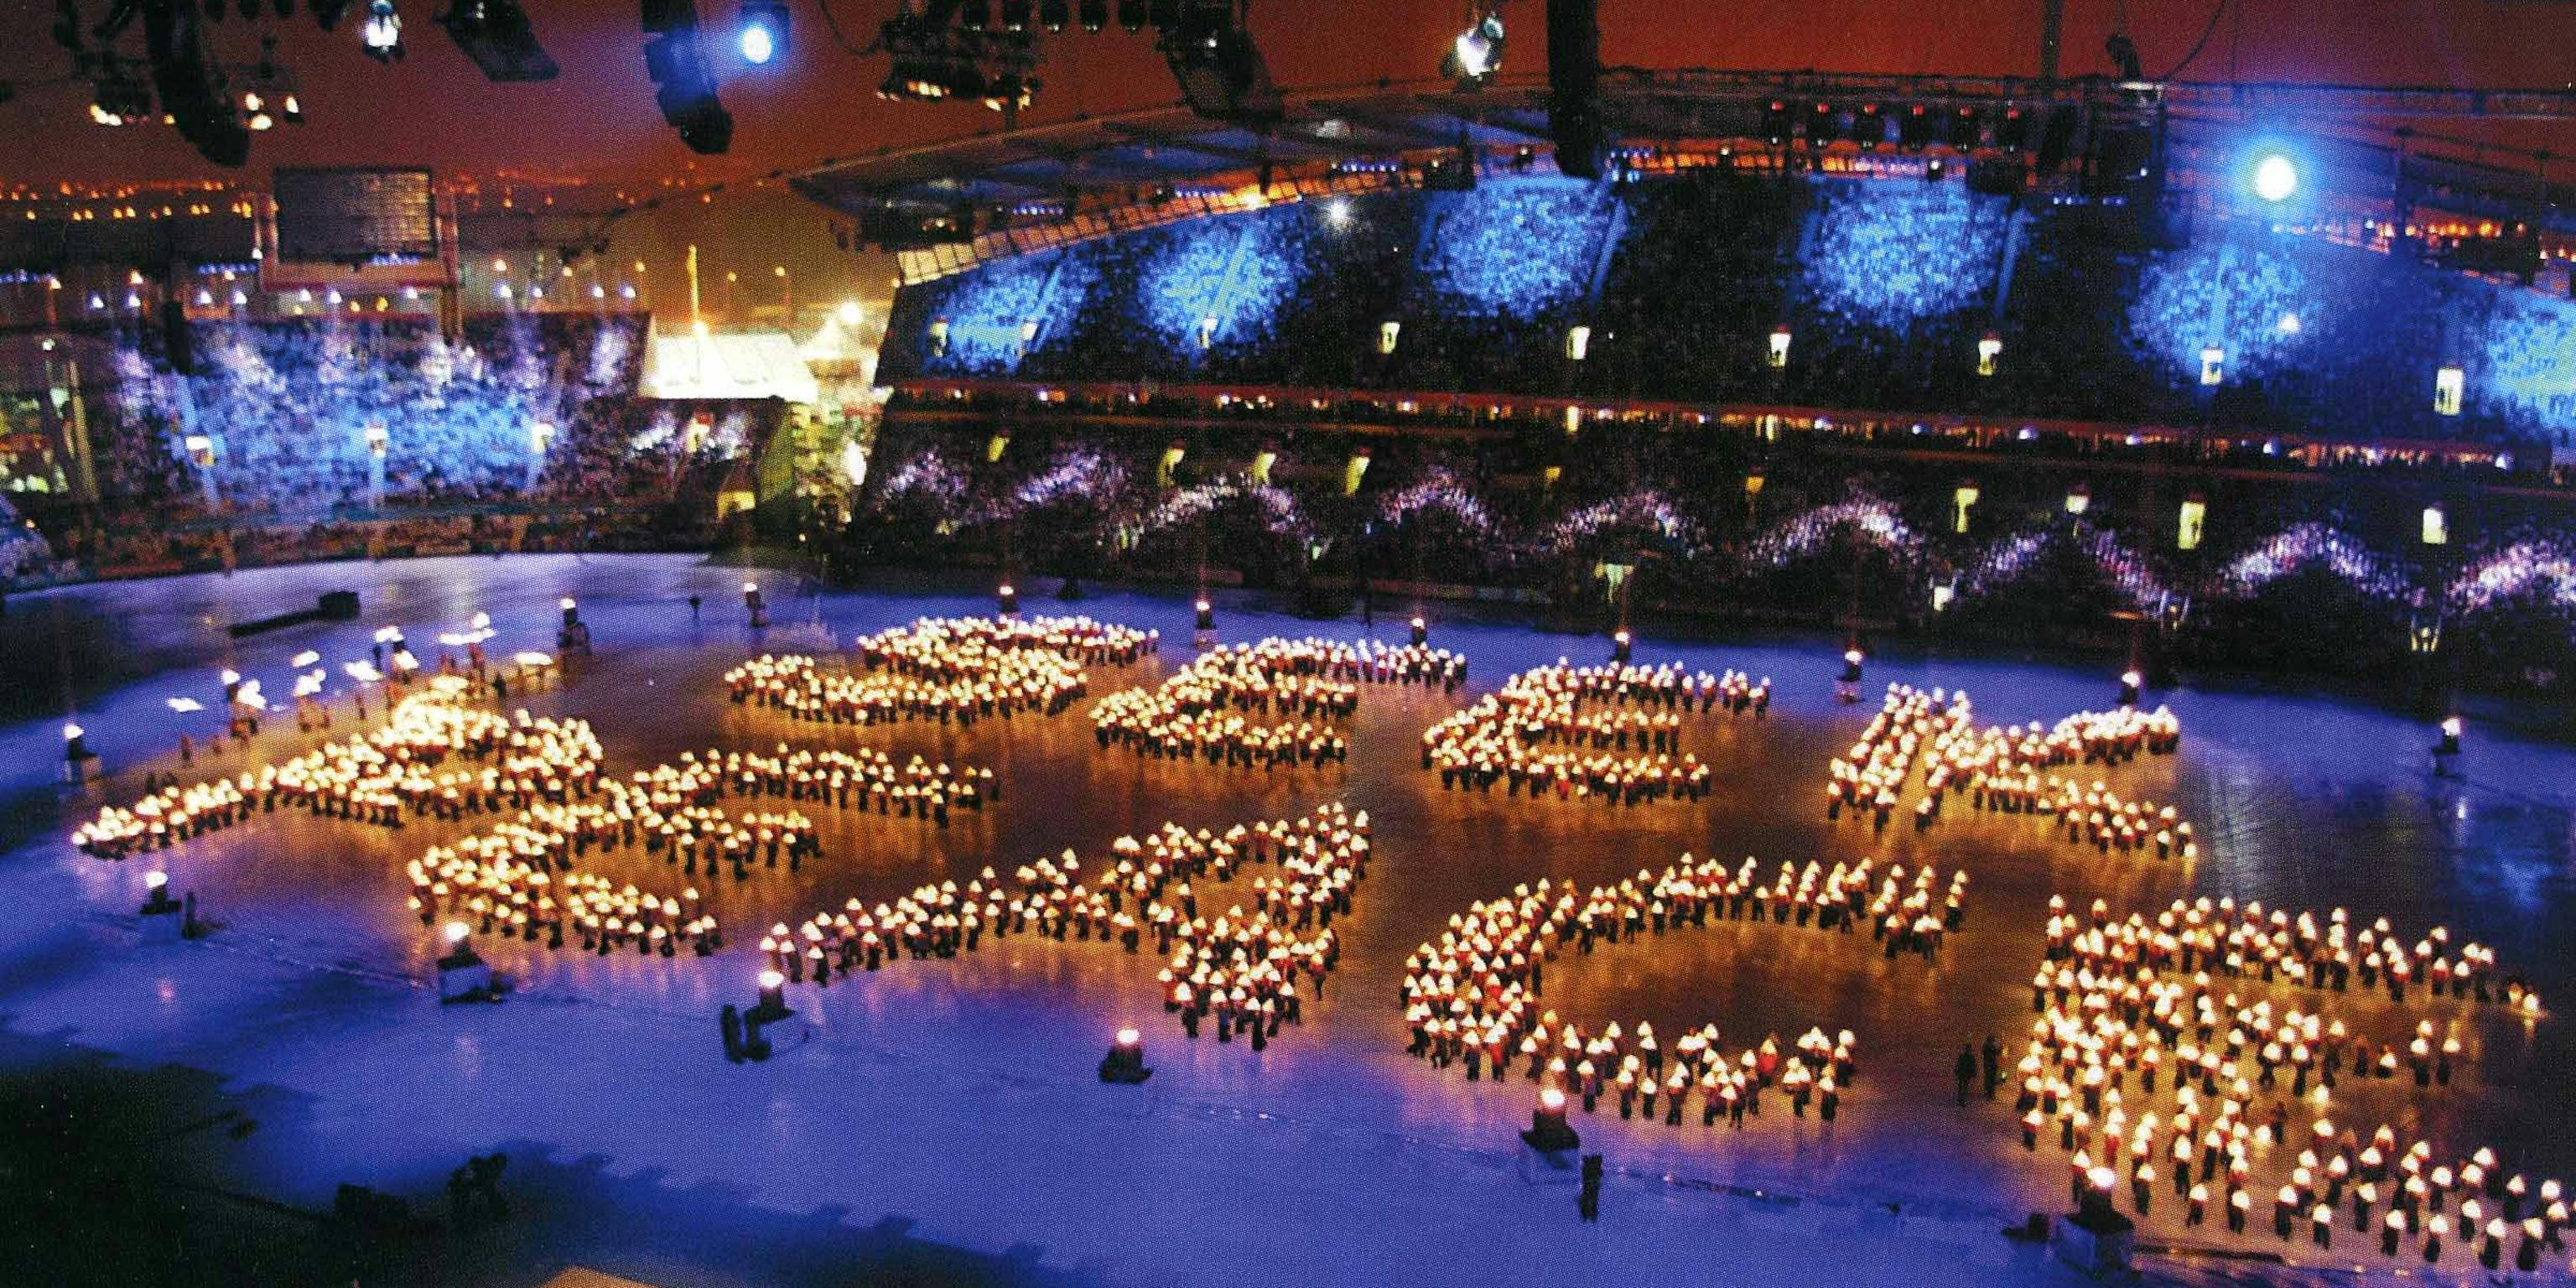 Hundreds of lanterns in the centre of an arena spelling out the words 'Seek Peace'